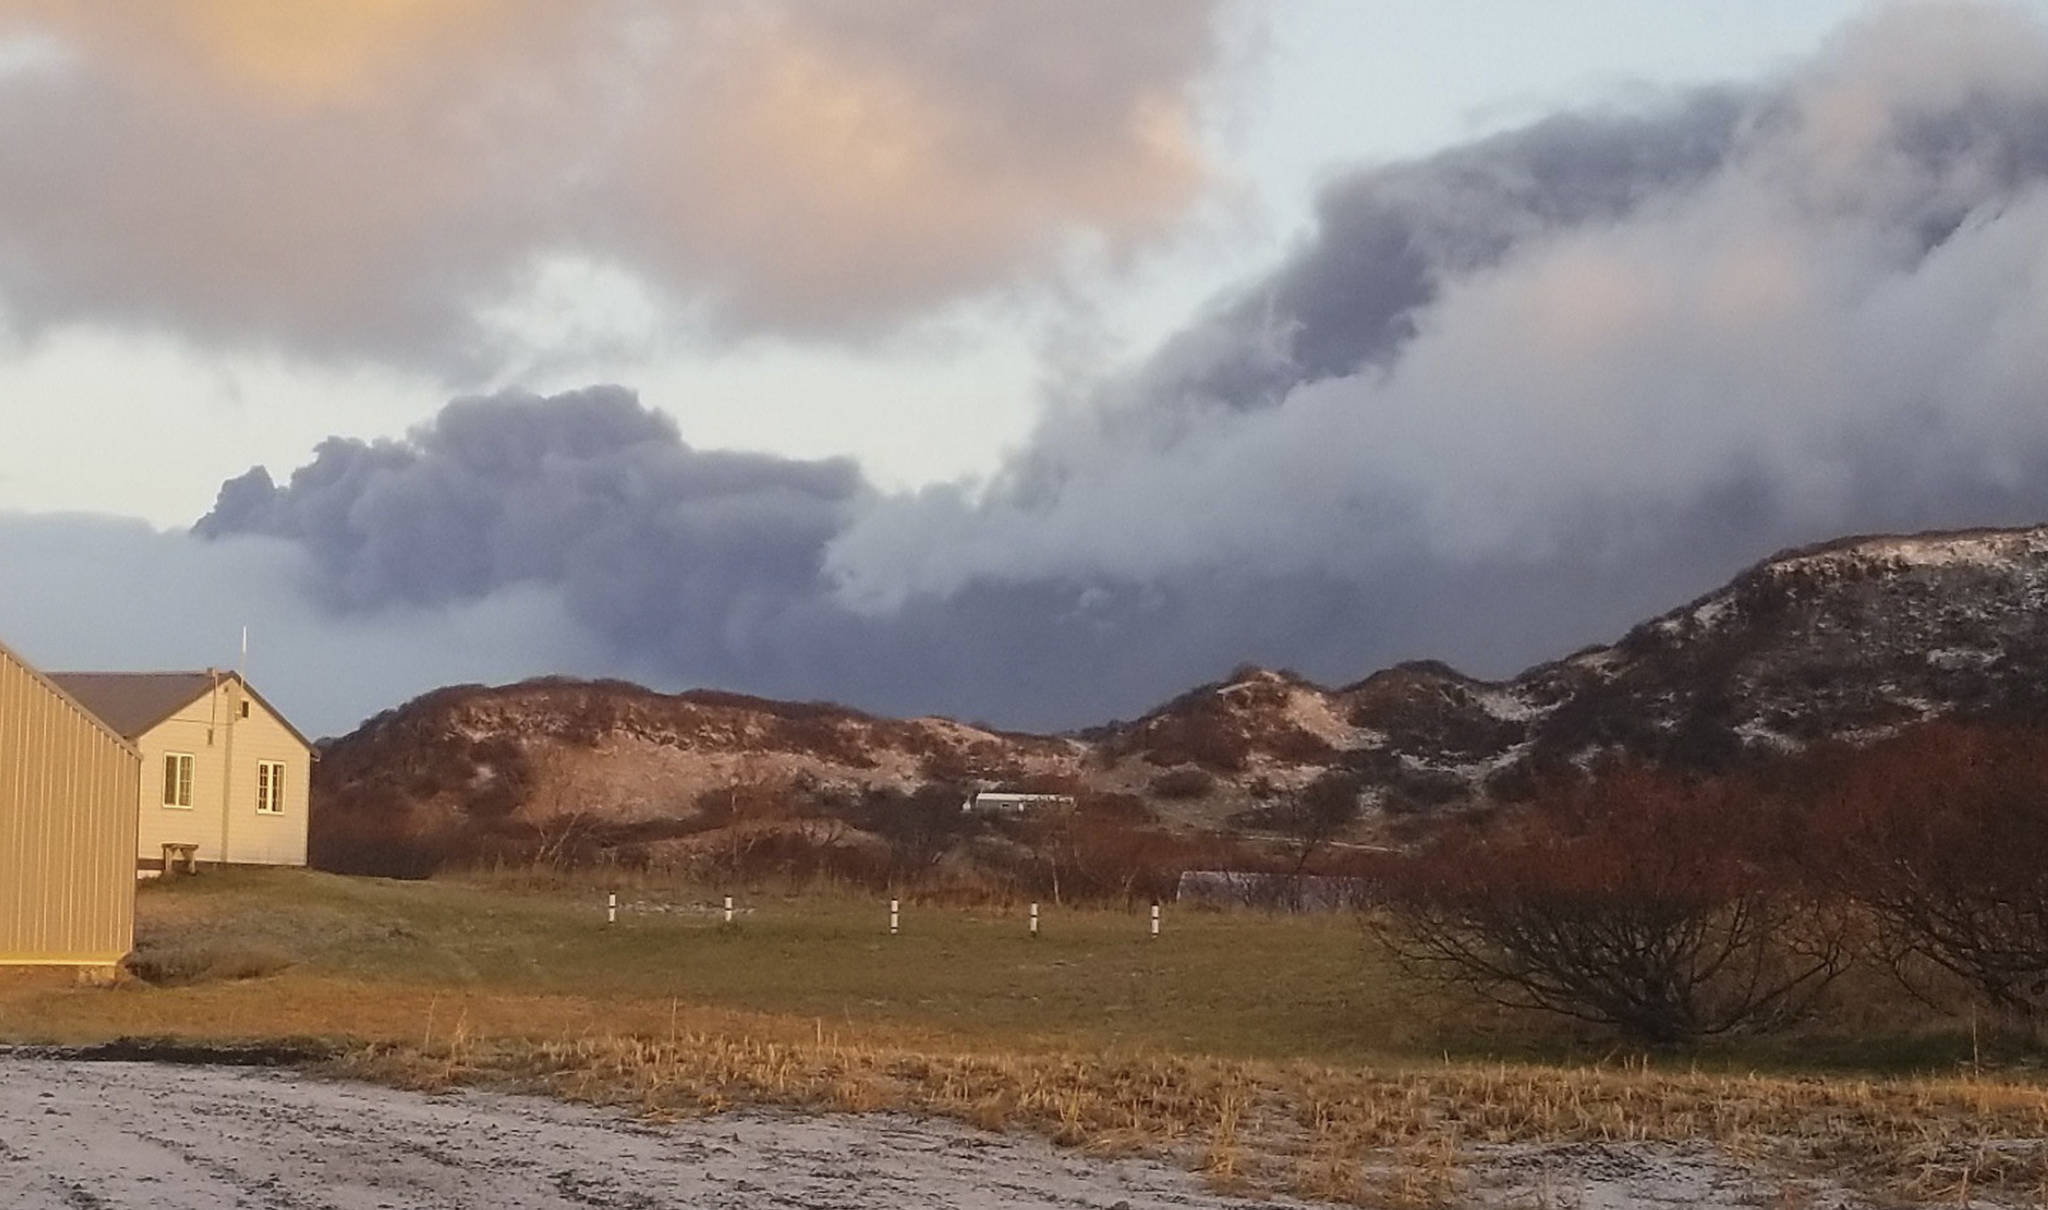 A black ash cloud from Alaska’s Mount Veniaminof passes the community of Perryville, Alaska, on Wednesday, Nov. 21, 2018. Alaska Volcano Observatory scientists said the overnight ash emissions from Mount Veniaminof generated an ash plume that drifted more than 150 miles to the southeast. (Victoria Tague via AP)